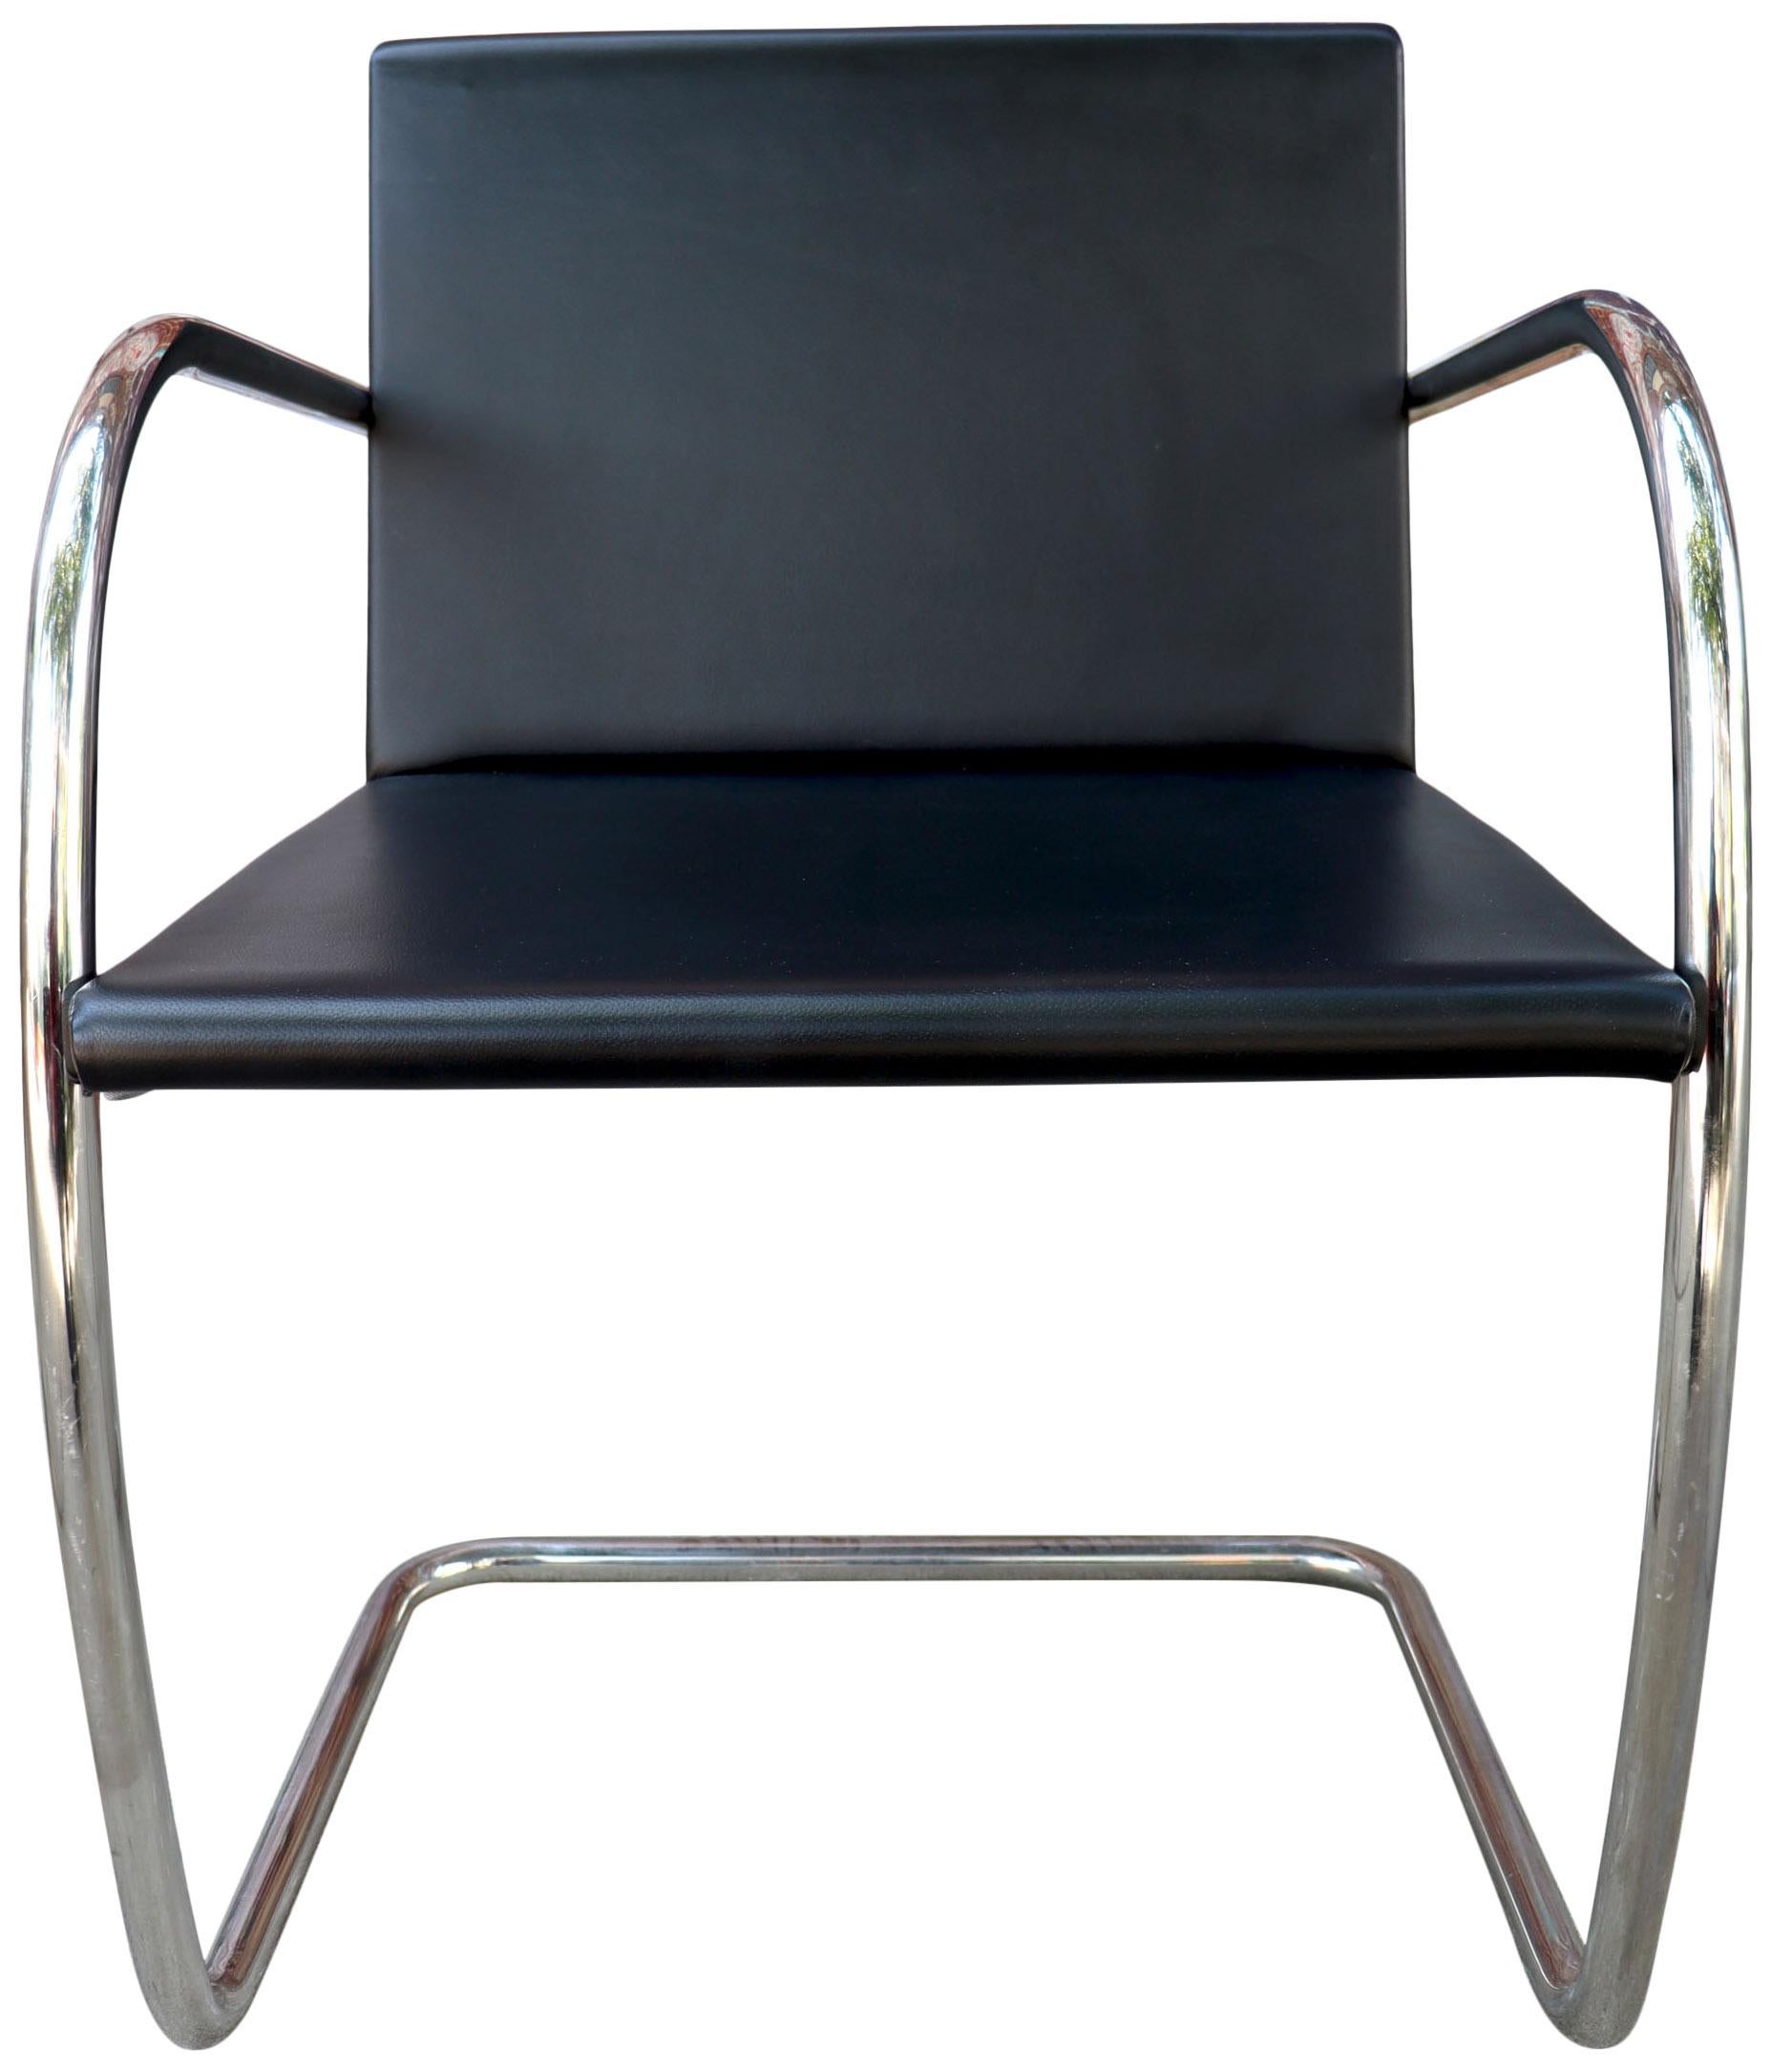 For your consideration are these black leather chairs in excellent condition showing very little use. Brno chairs with tubular frame and thin pad seats and backs as was the original design.

Ludwig Mies van der Rohe by Knoll. Beautiful showing